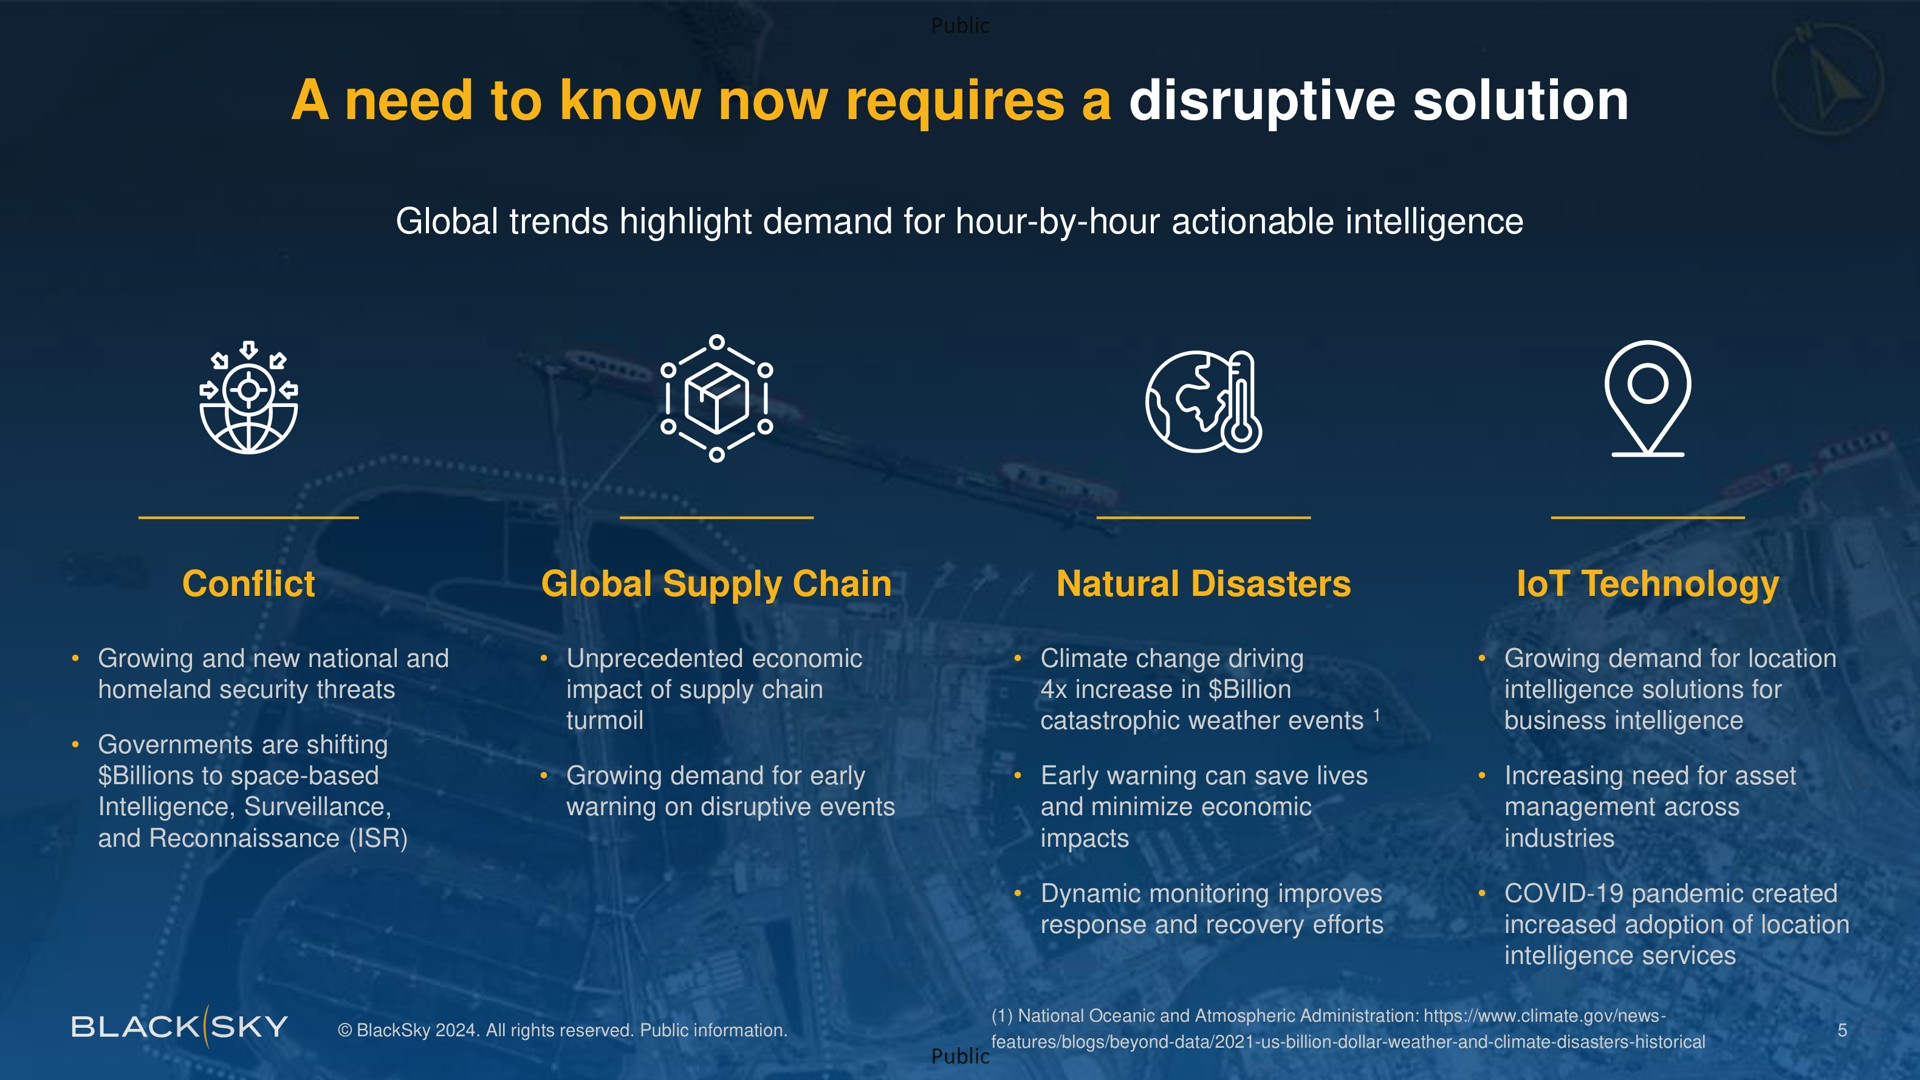 a need to know now requires a disruptive solution | BlackSky